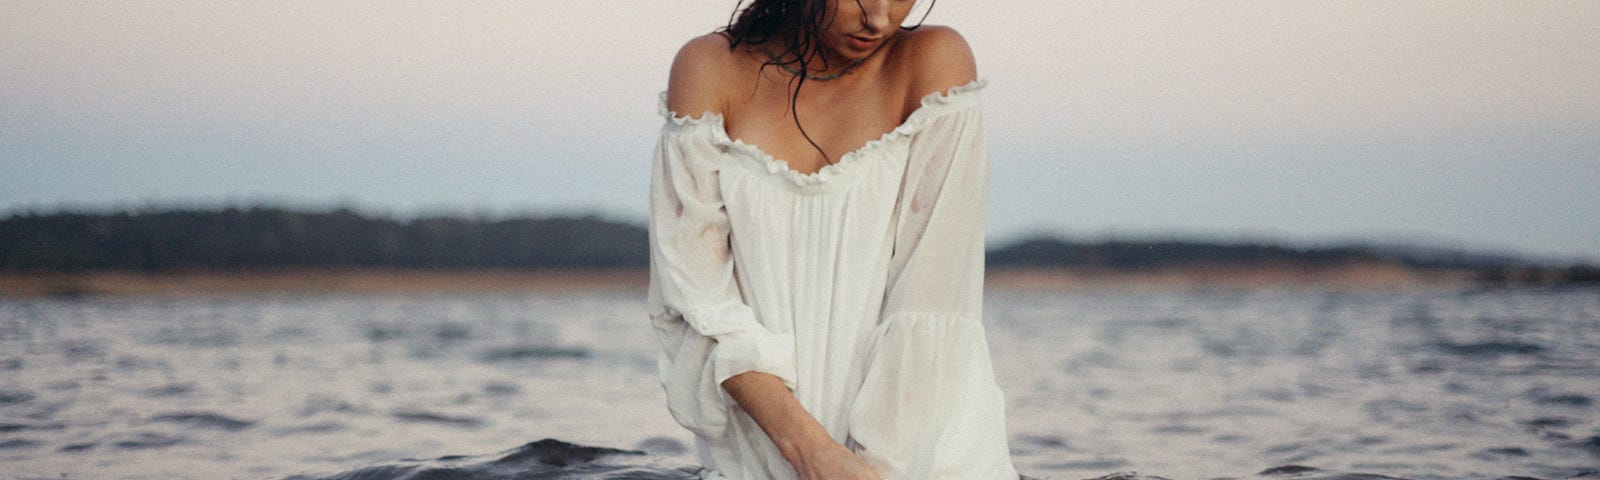 A woman in a white dress swimming knee-deep in ocean at sunset.